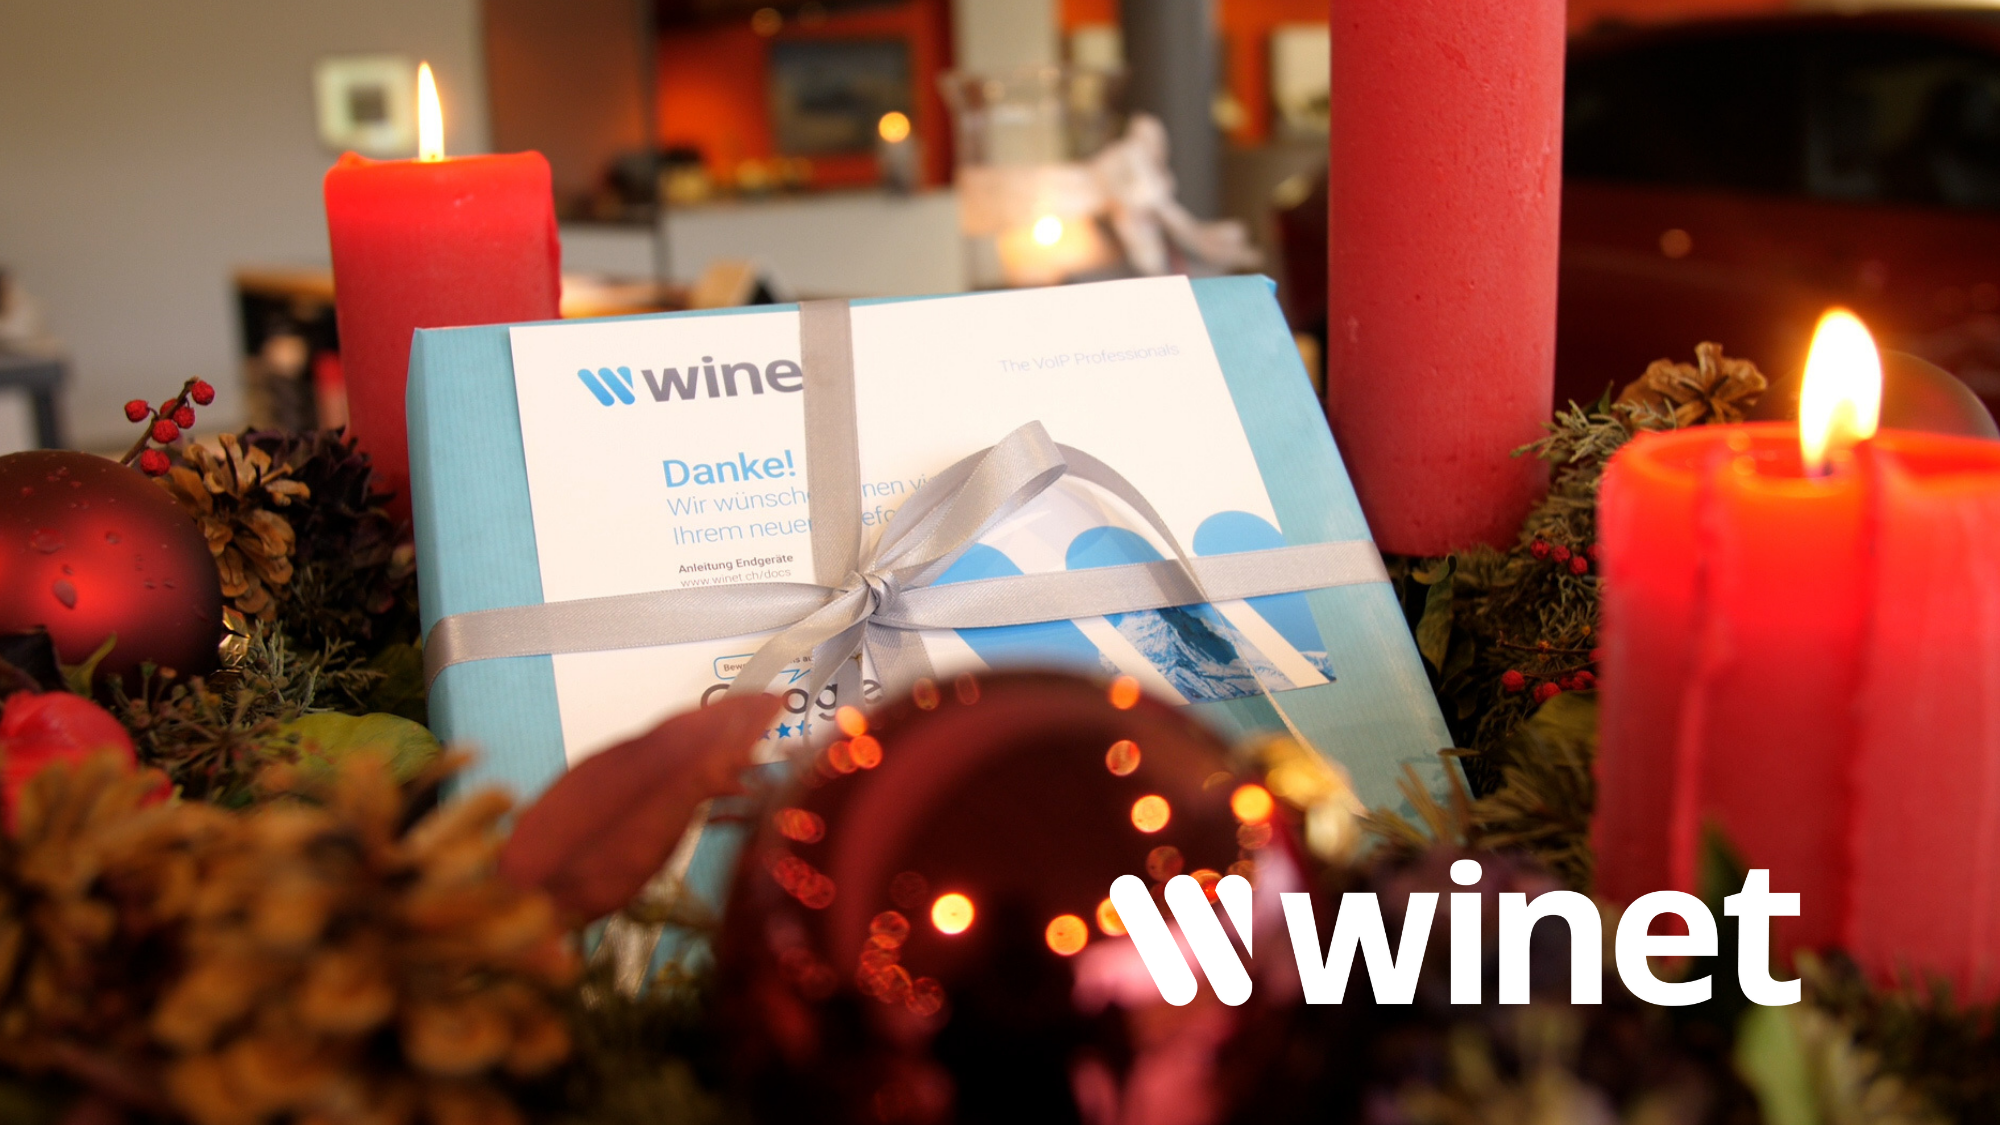 Winet Christmas gift campaign